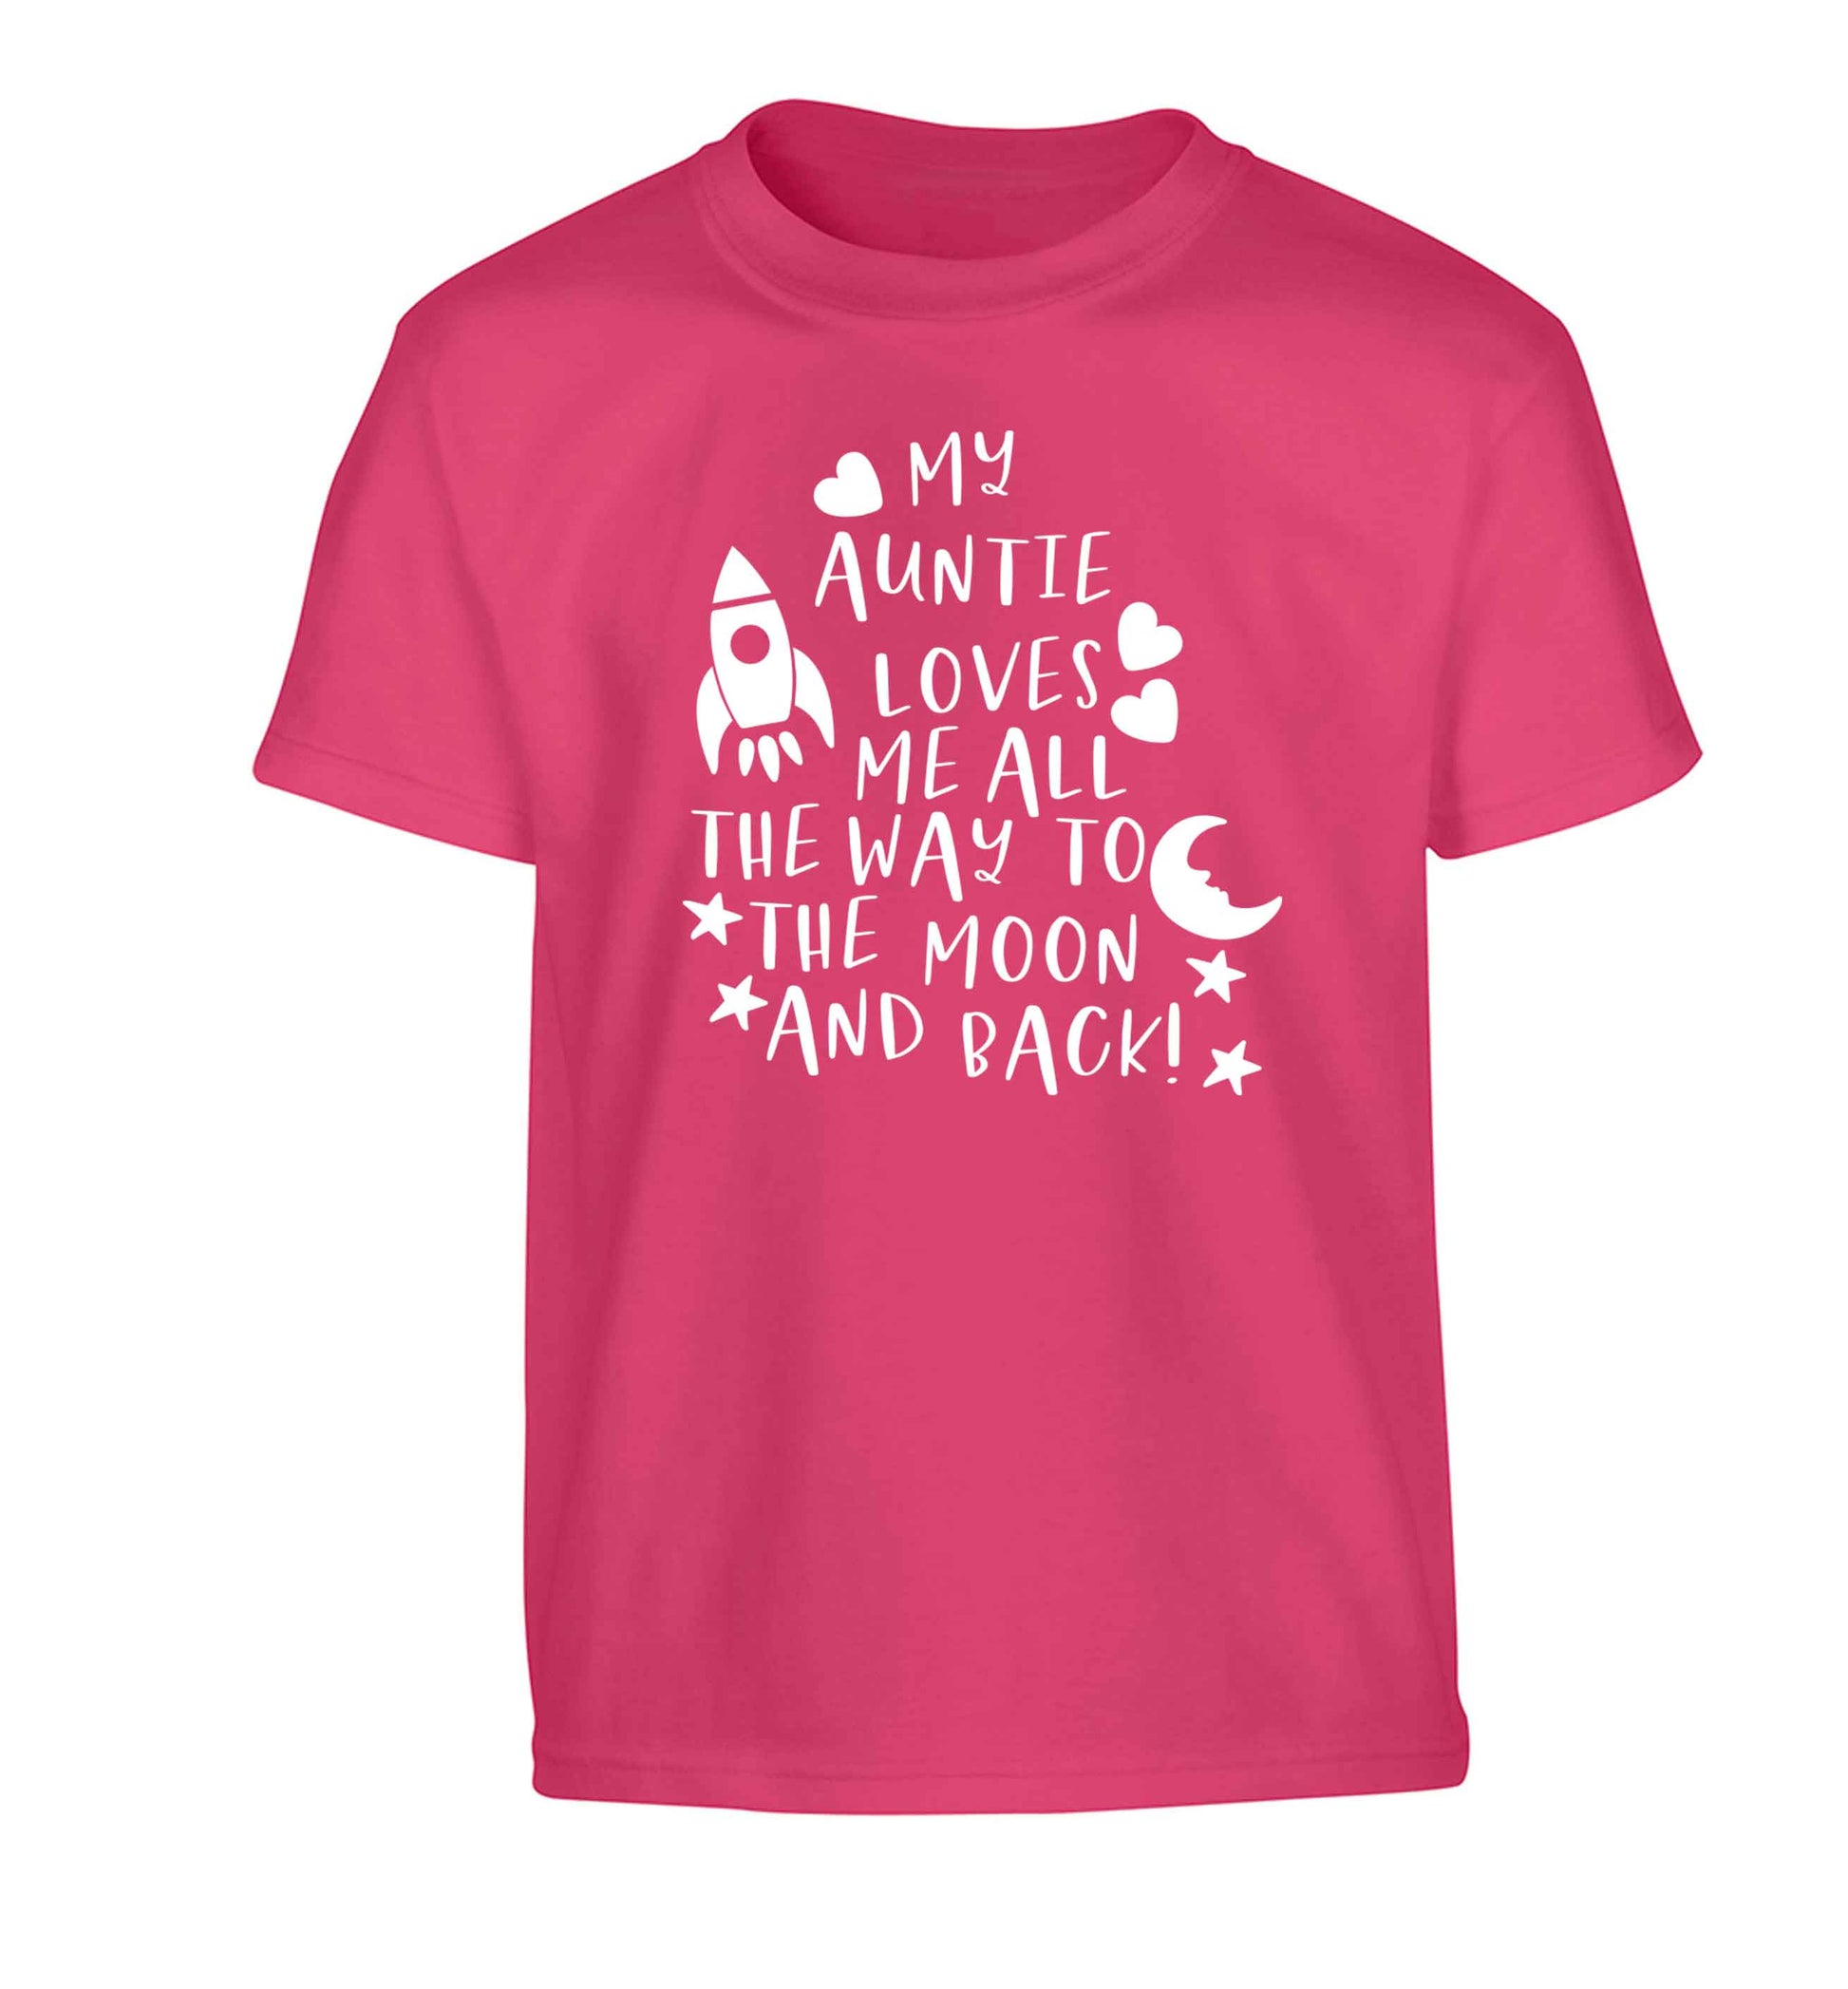 My auntie loves me all the way to the moon and back Children's pink Tshirt 12-13 Years